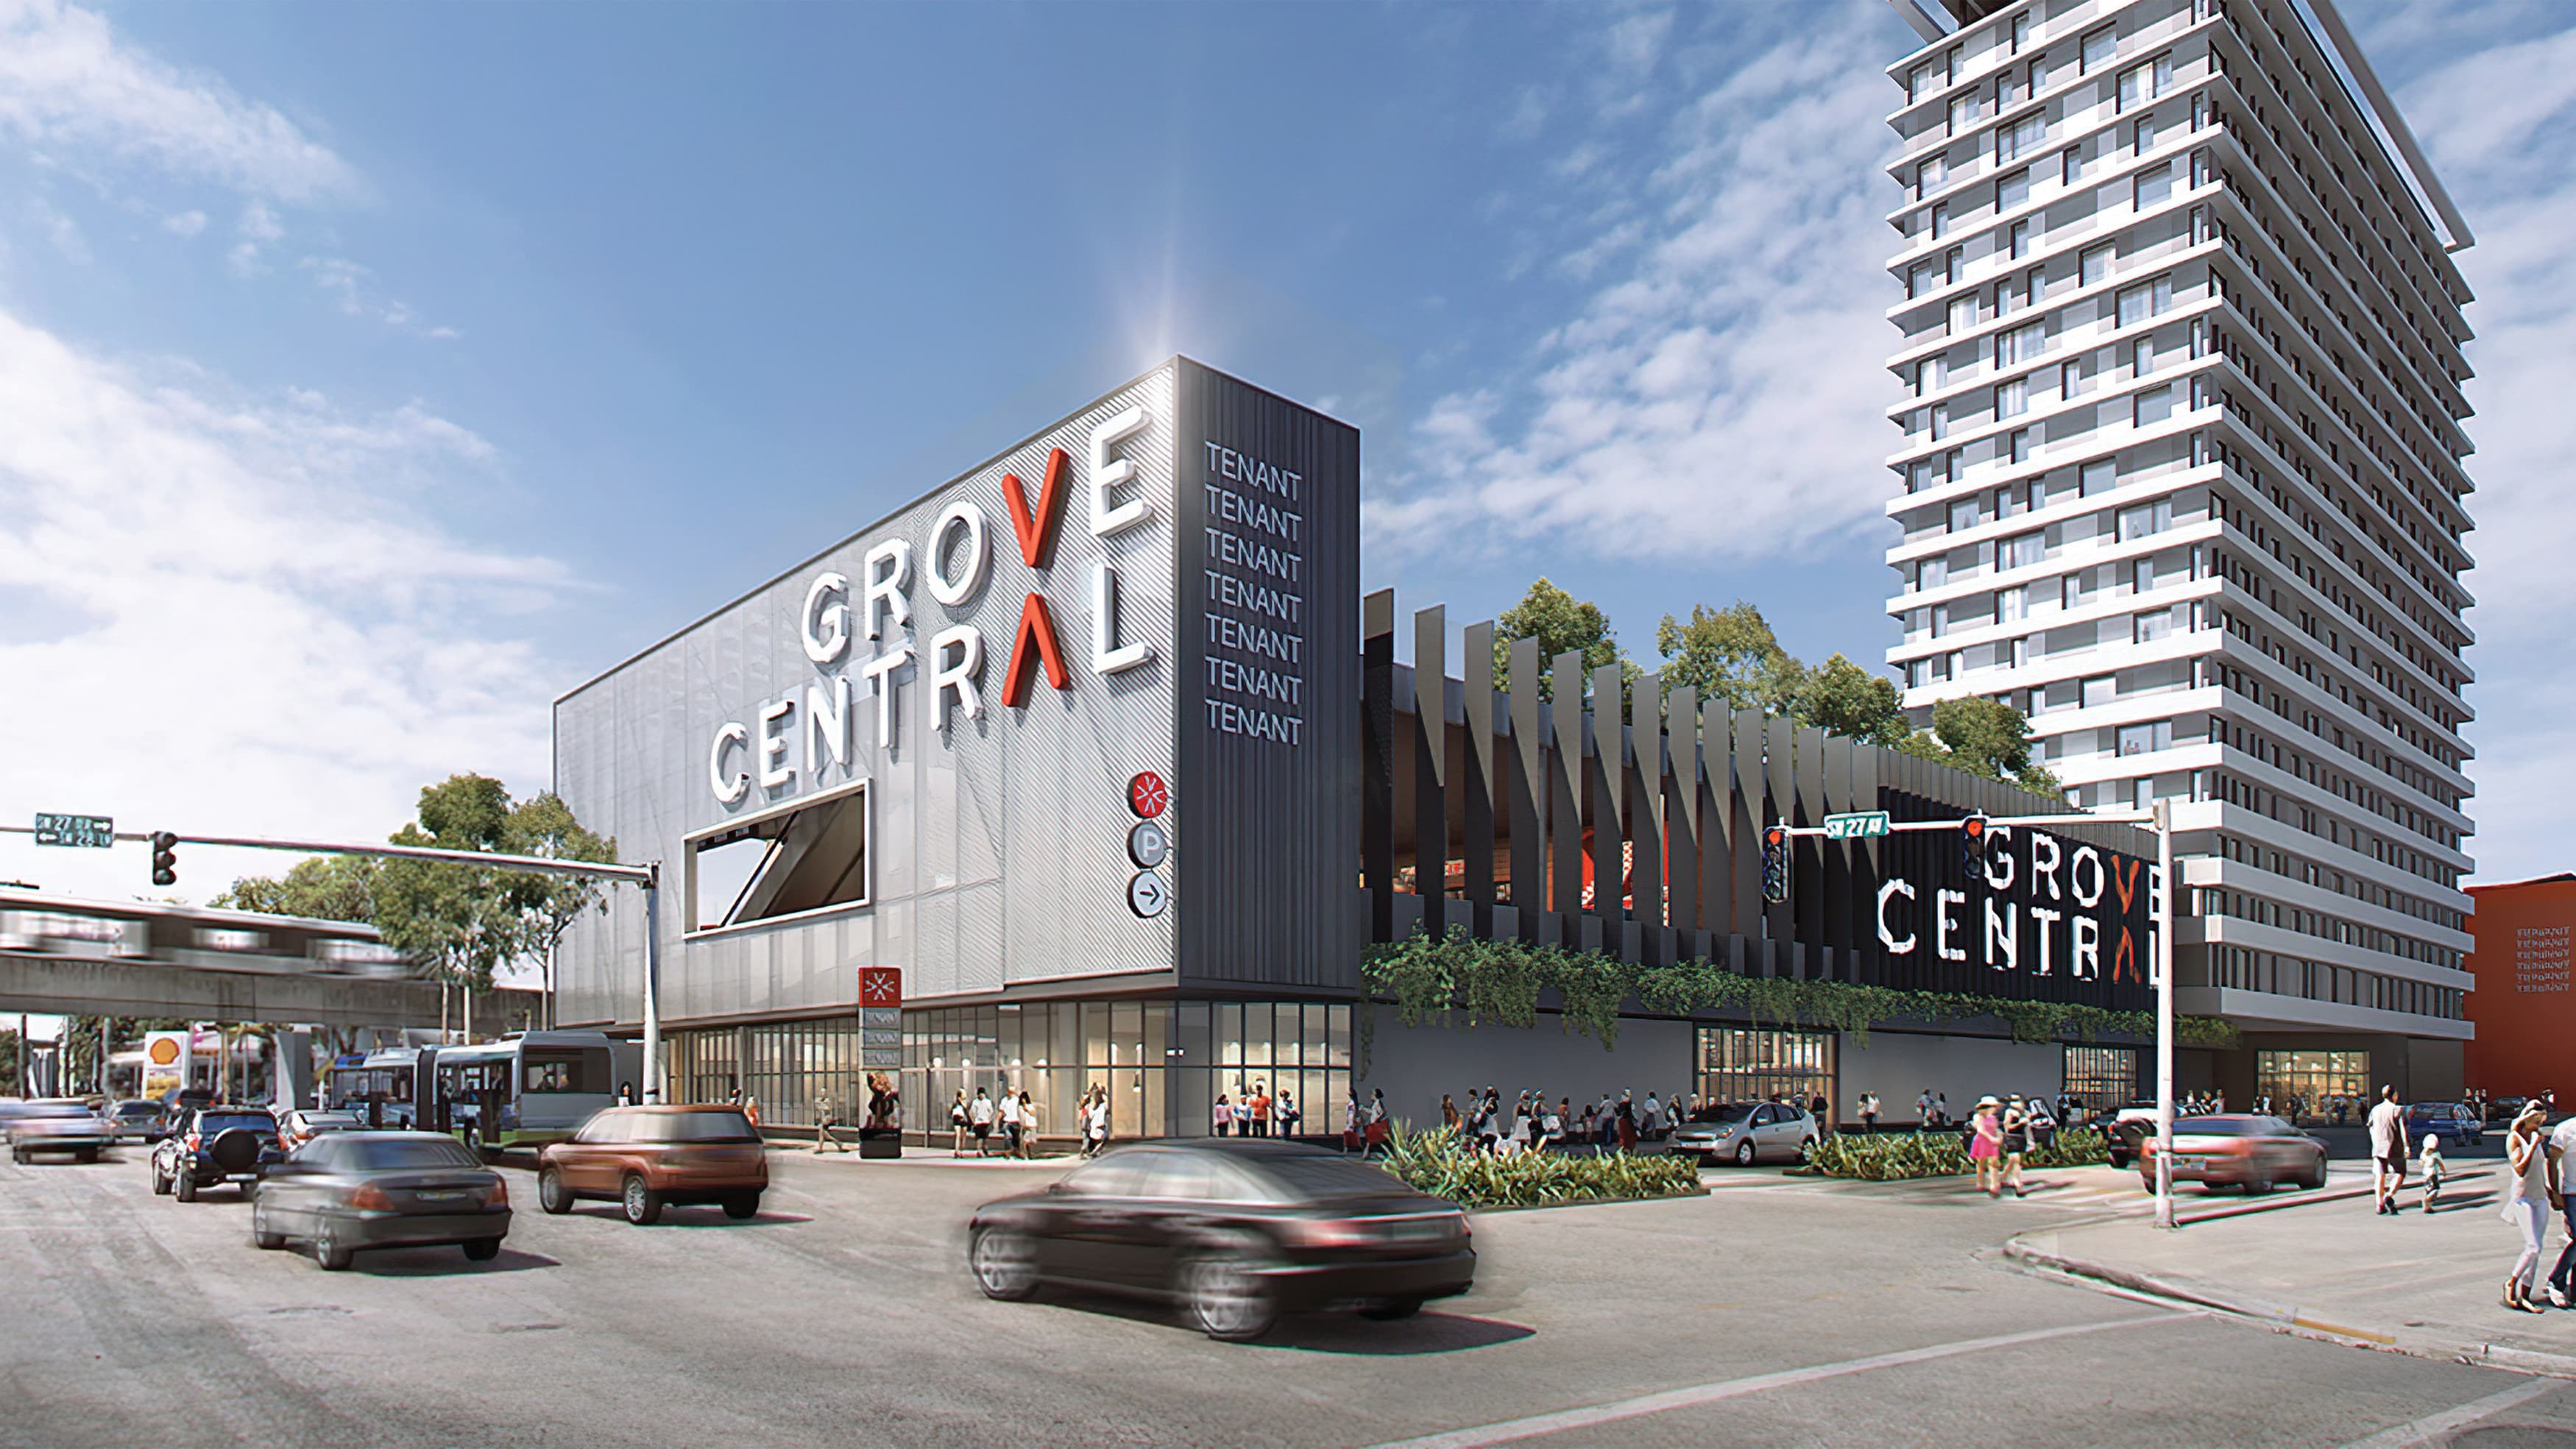 A rendering of architecture featuring large, bold identity signage.